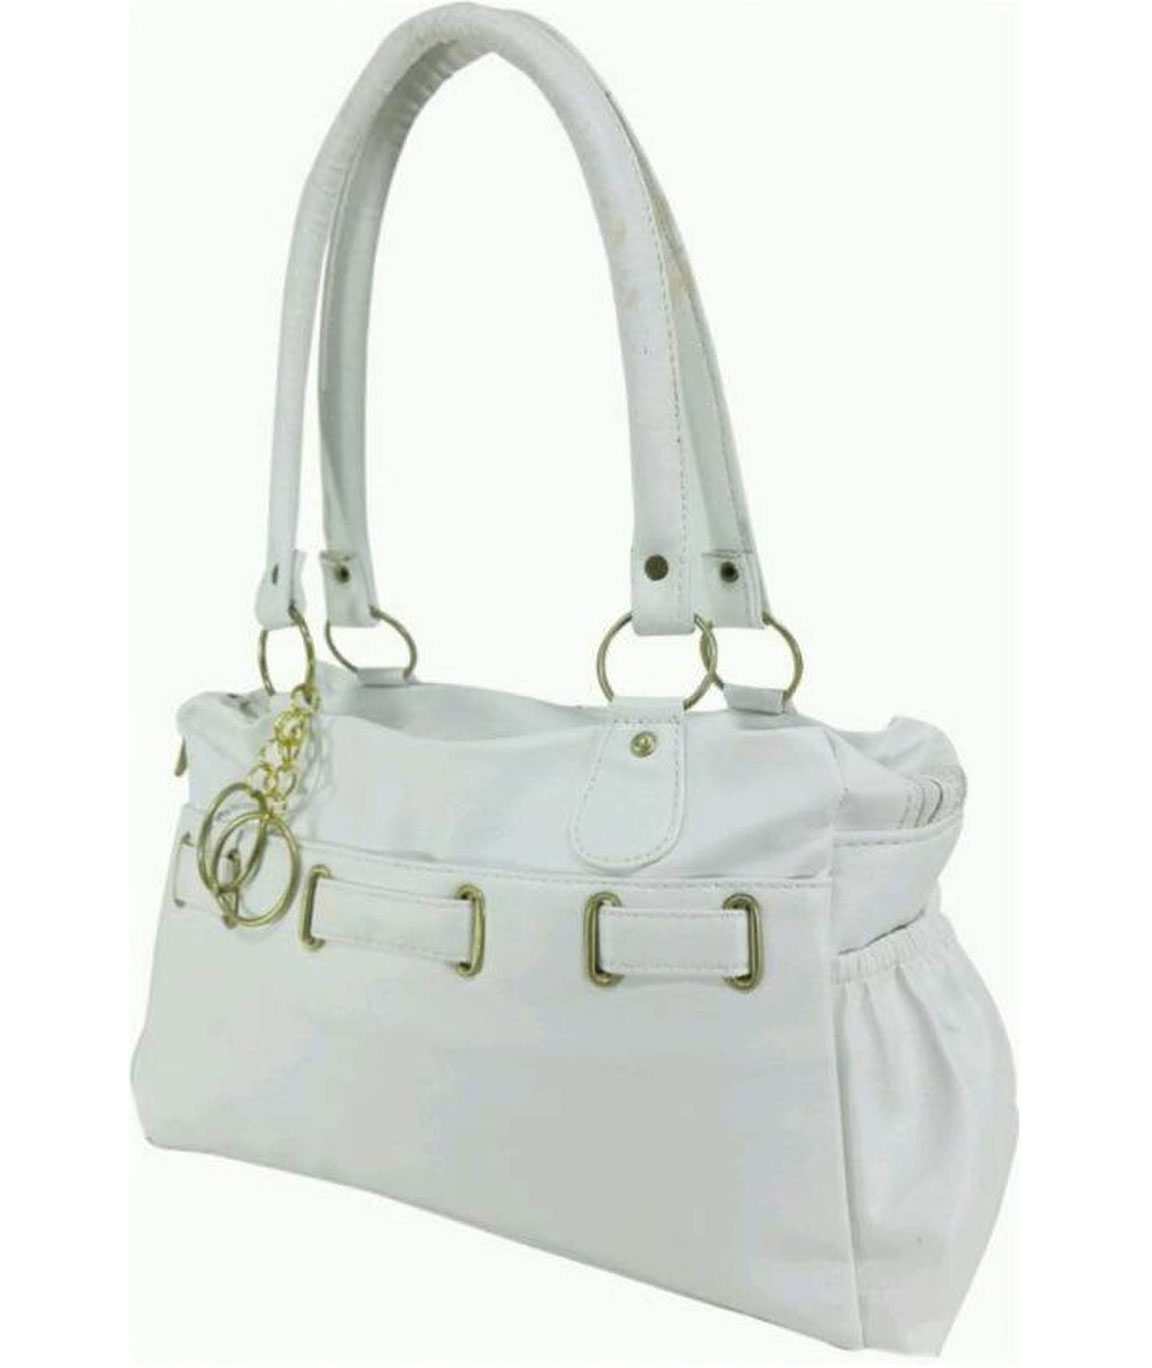 EMPORIO ARMANI: bag in grained synthetic leather - White | Emporio Armani tote  bags Y3D165YFO5B online at GIGLIO.COM